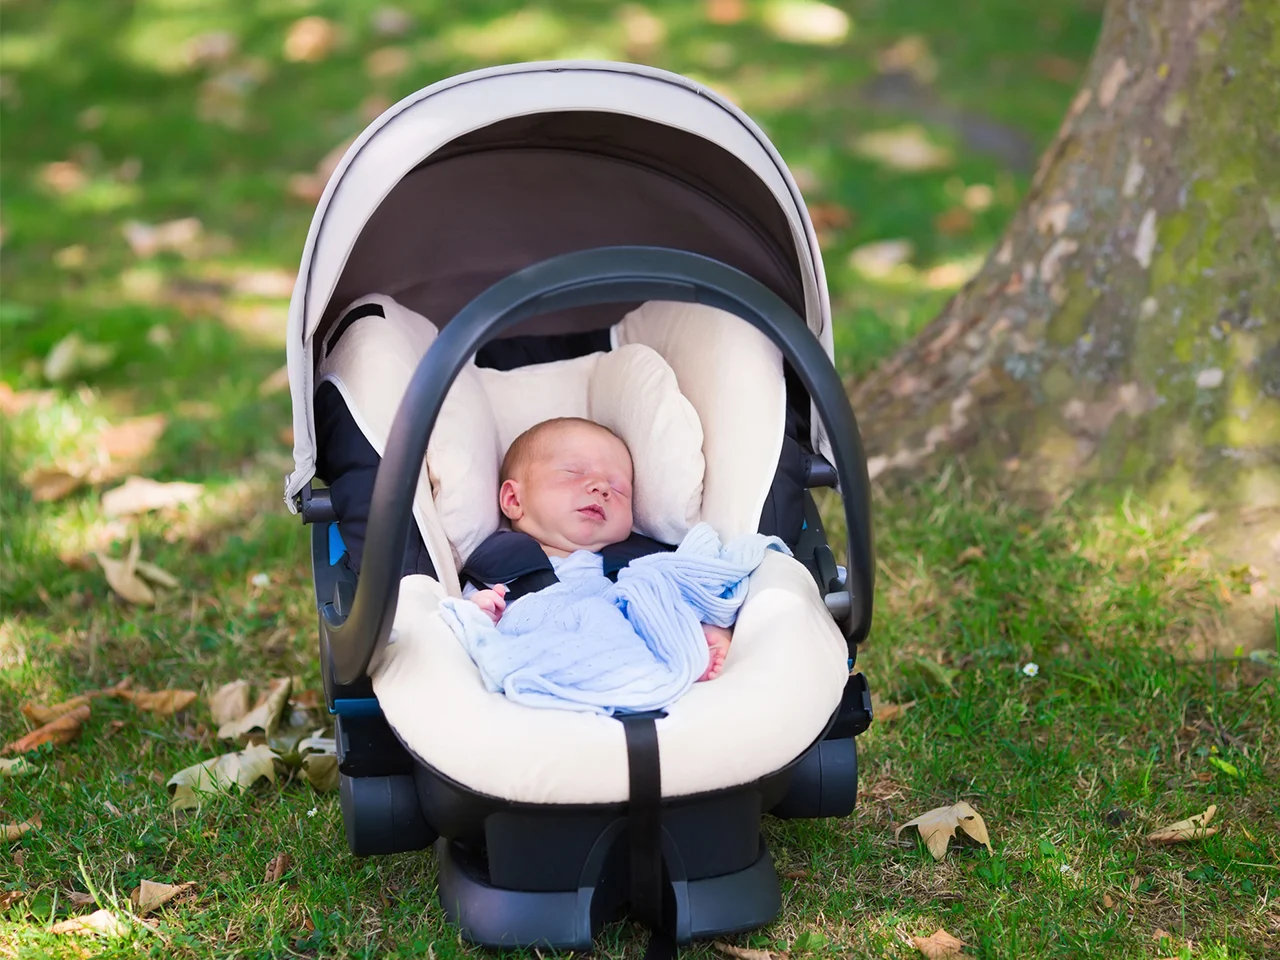 What to Do if Your Child Has Fallen Asleep in the Graco Duoglider?